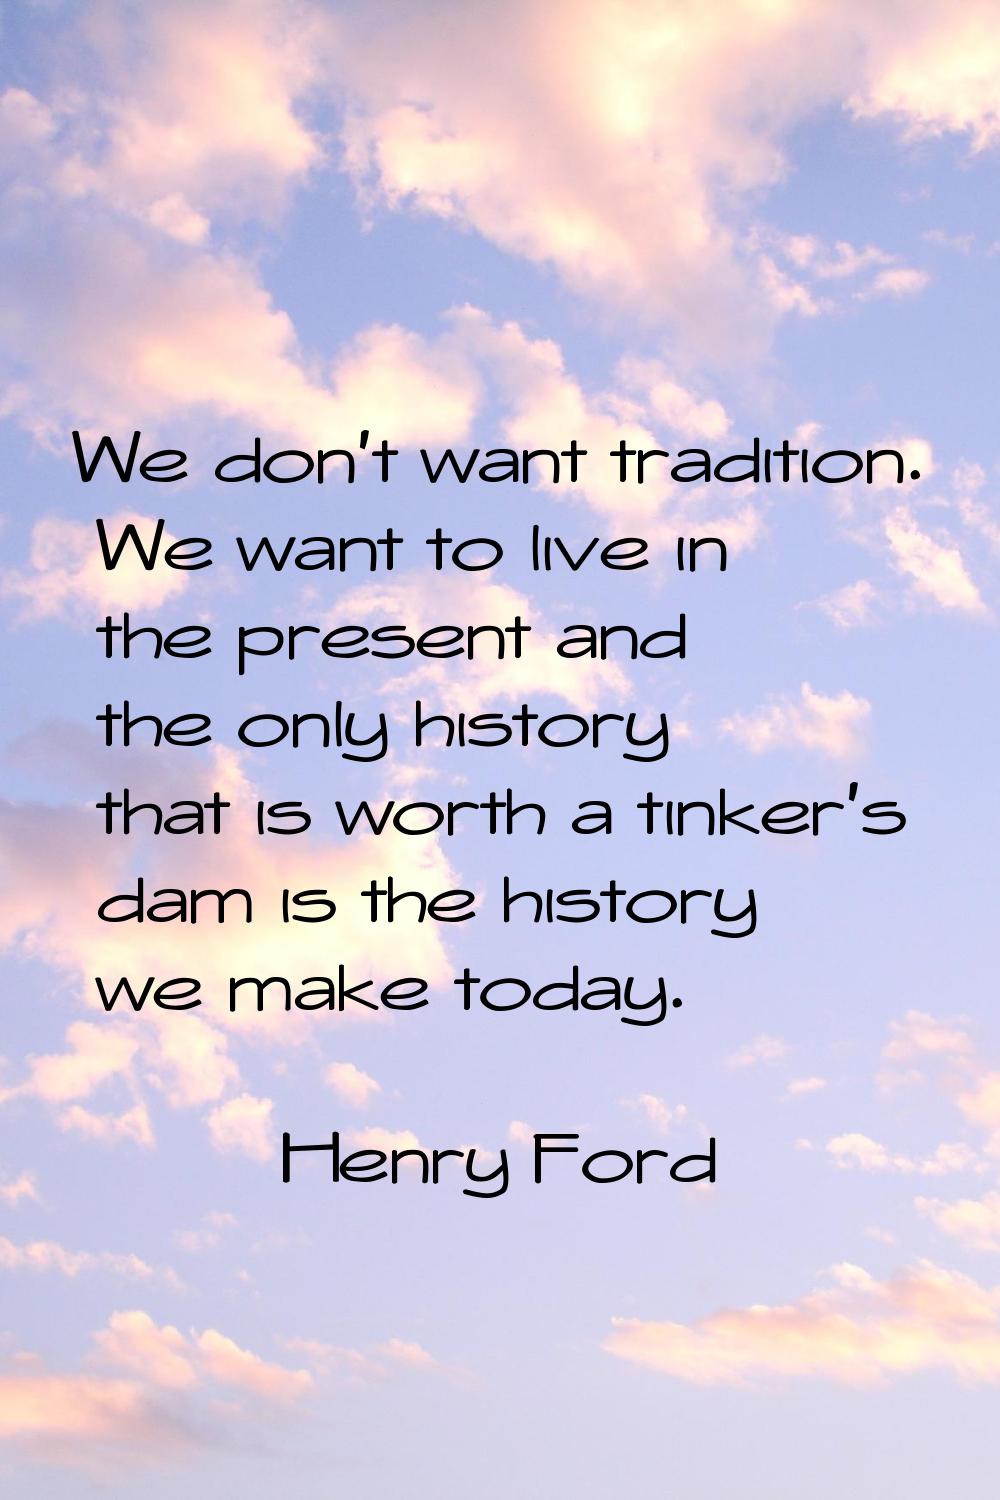 We don't want tradition. We want to live in the present and the only history that is worth a tinker